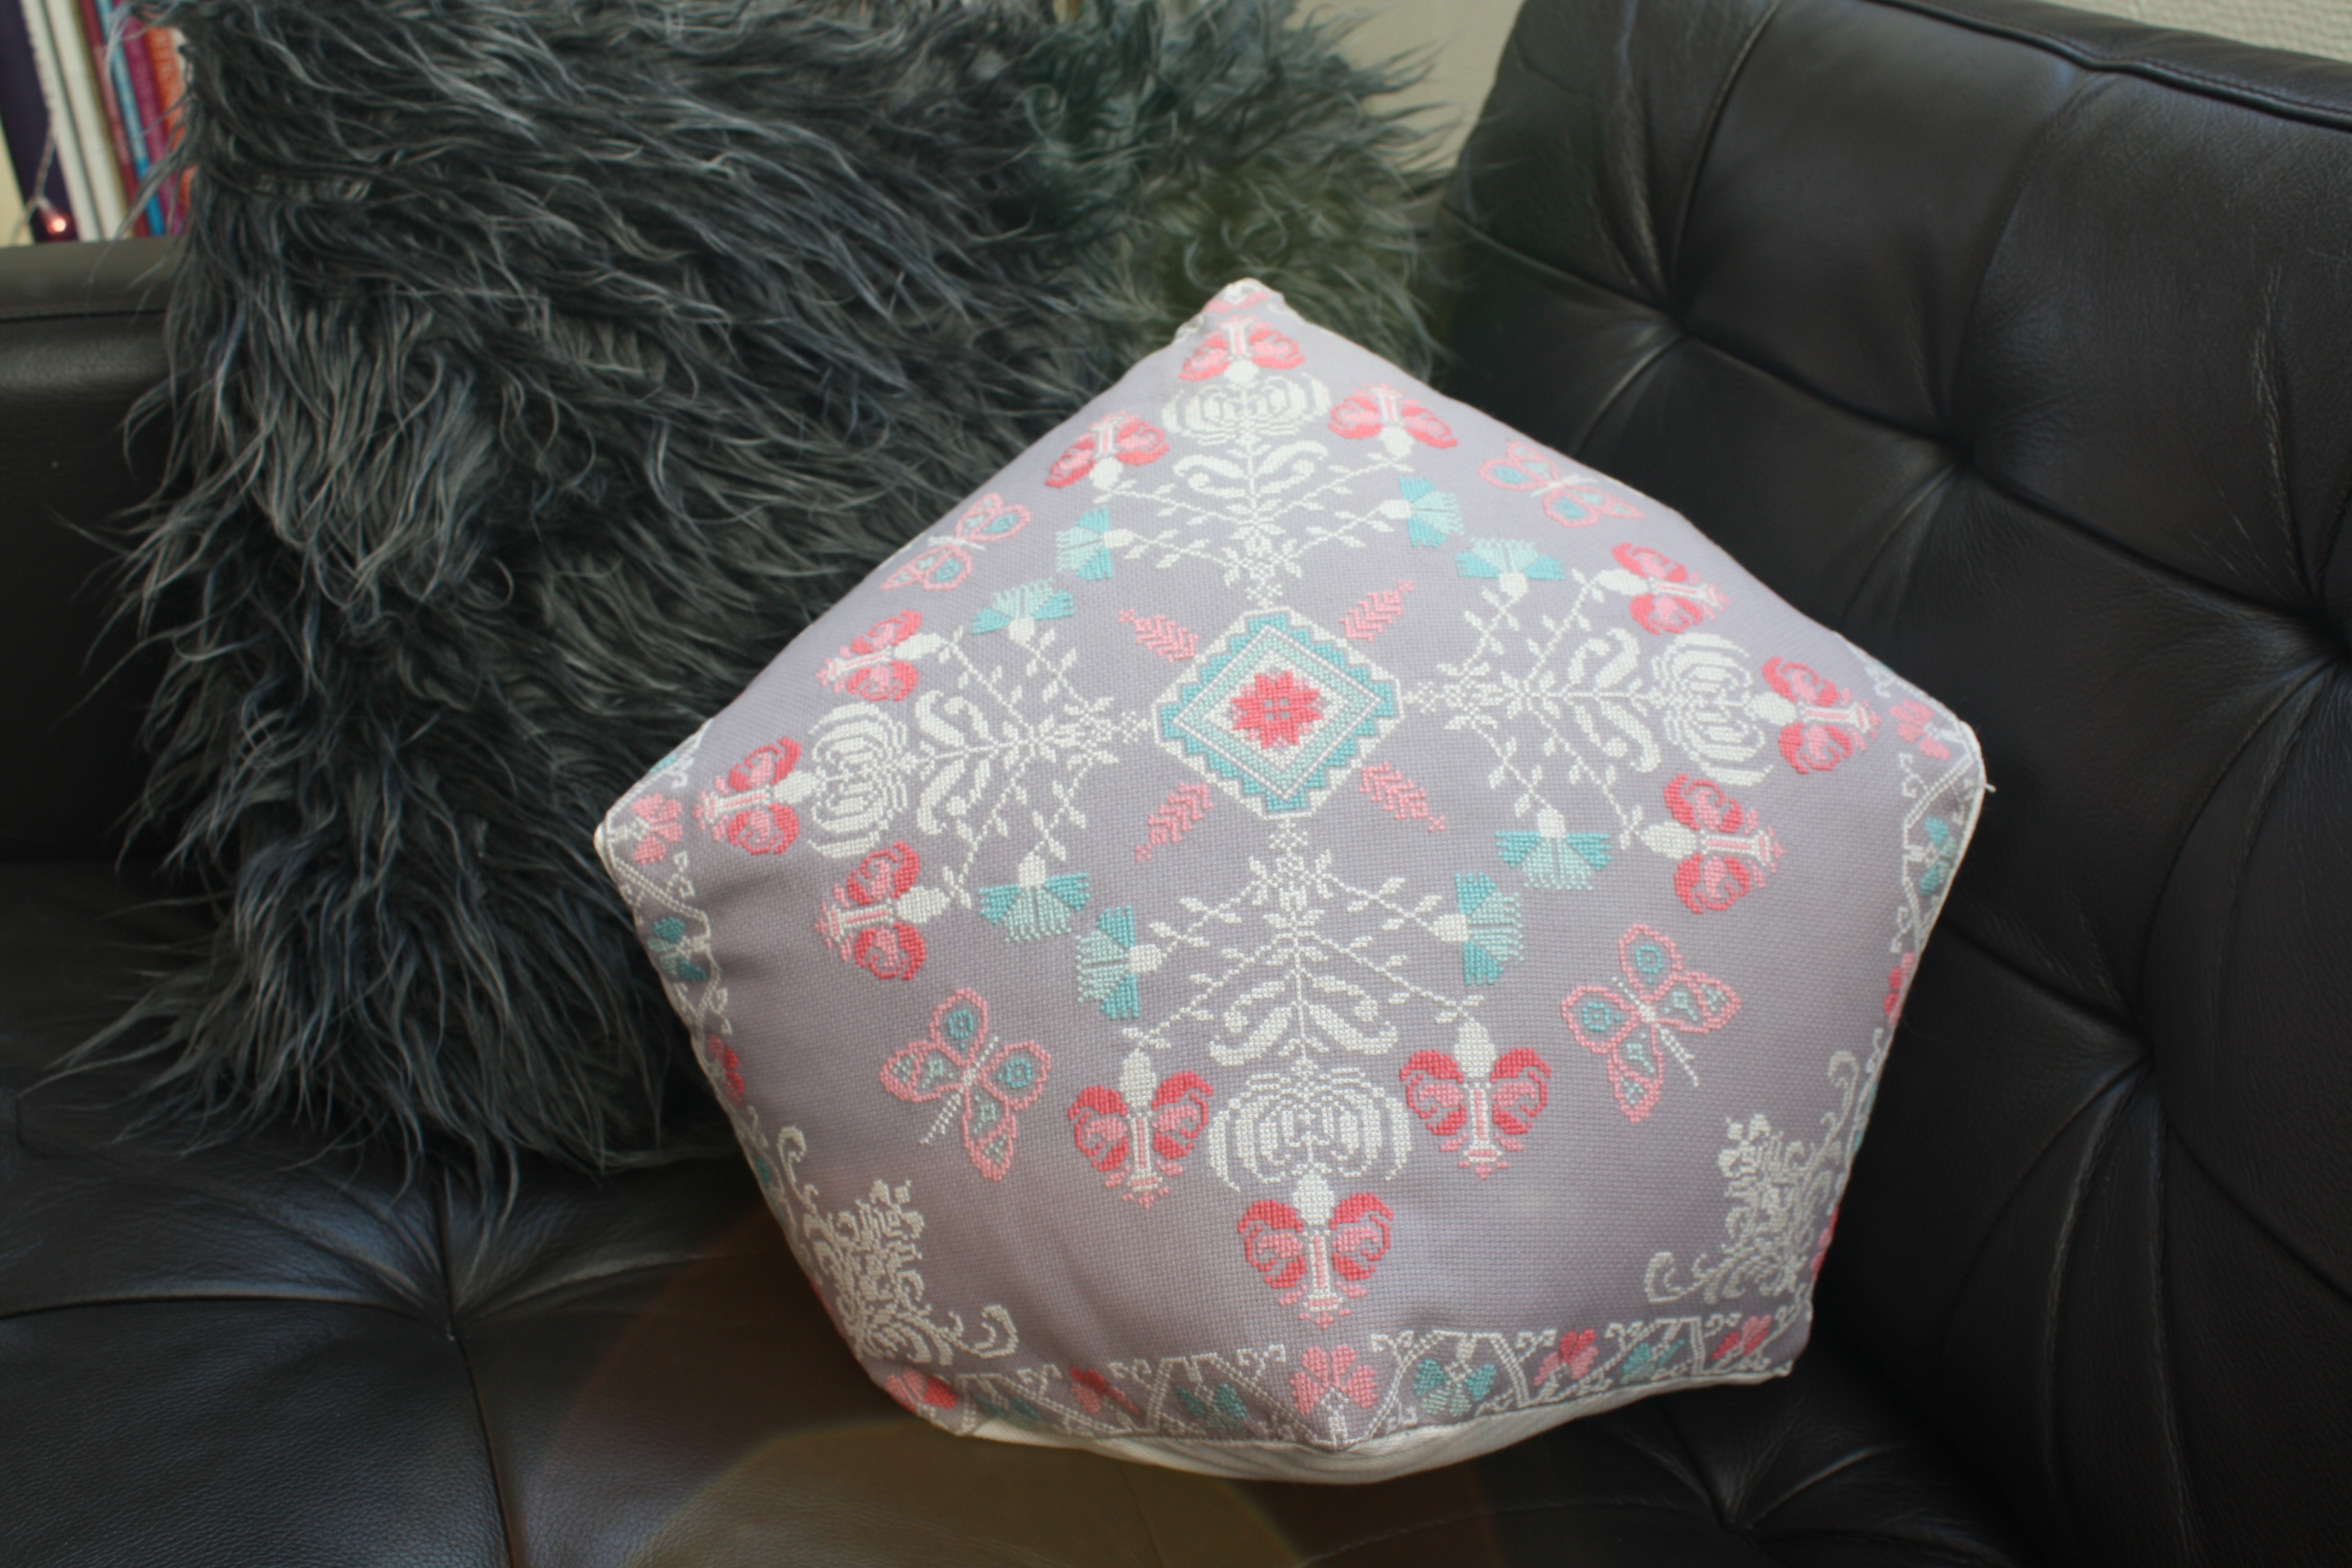 The very large and timeconsuming decorative biscornu pillow